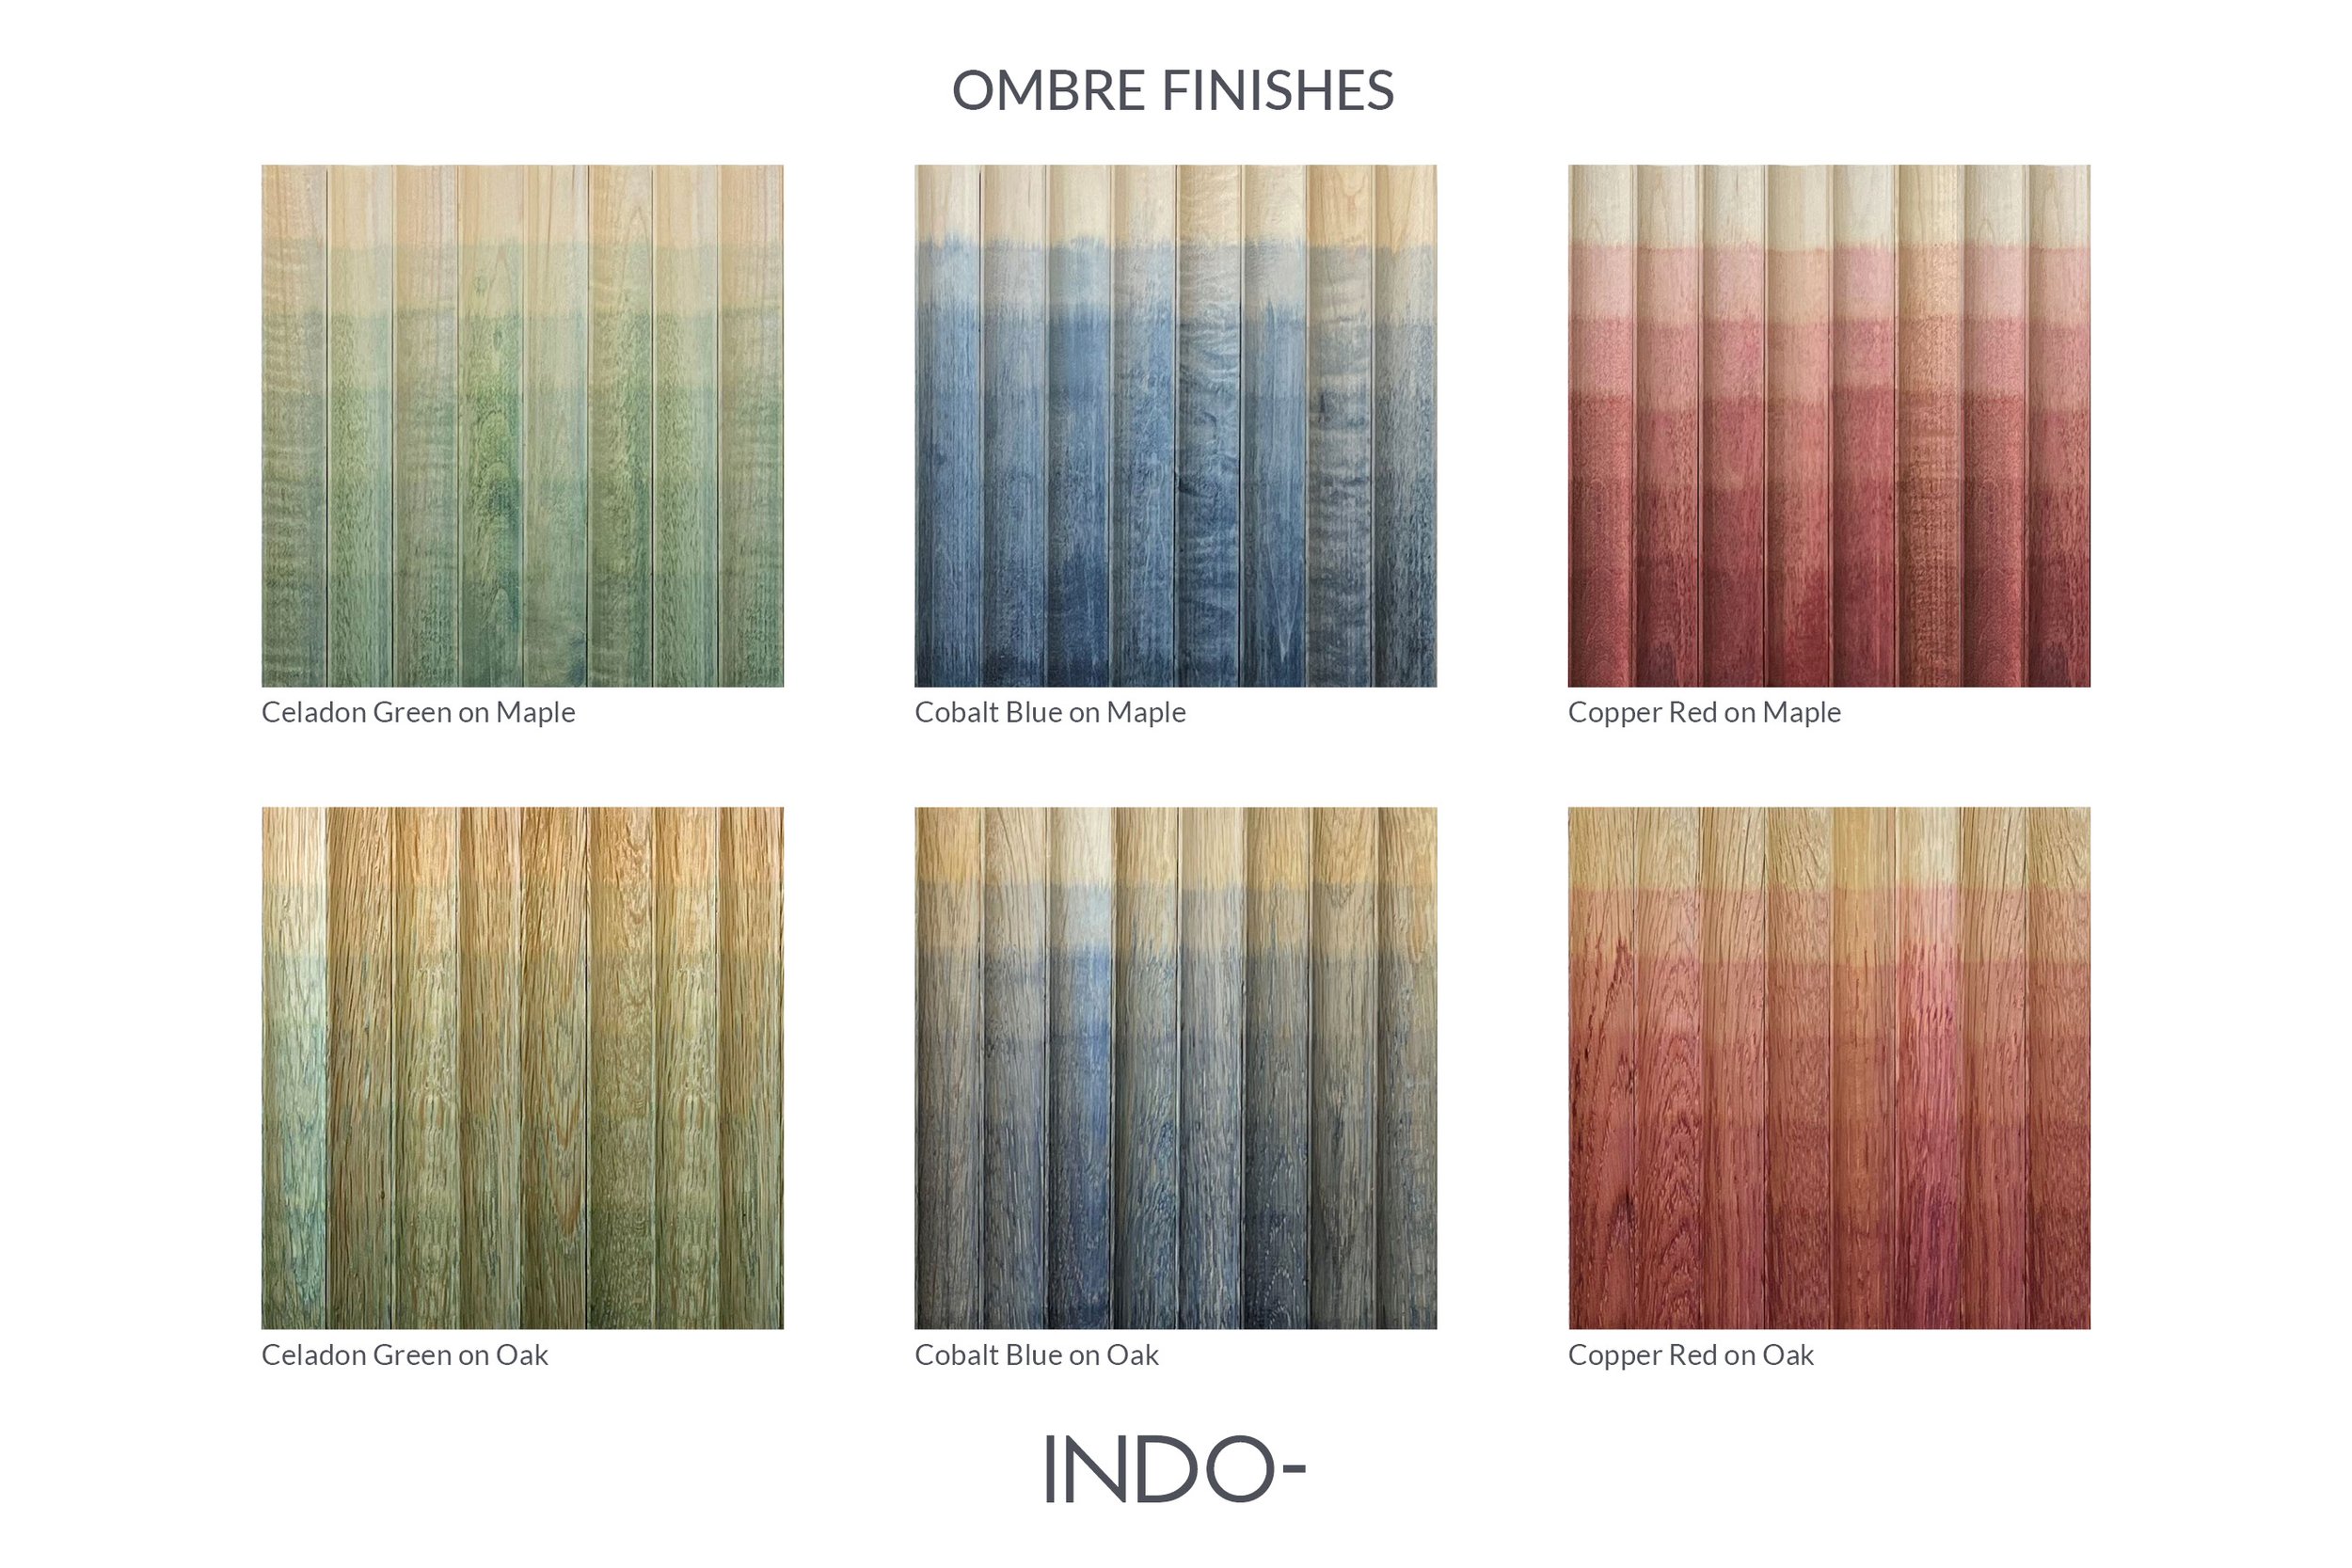 INDO_Ombre_Finishes.jpg